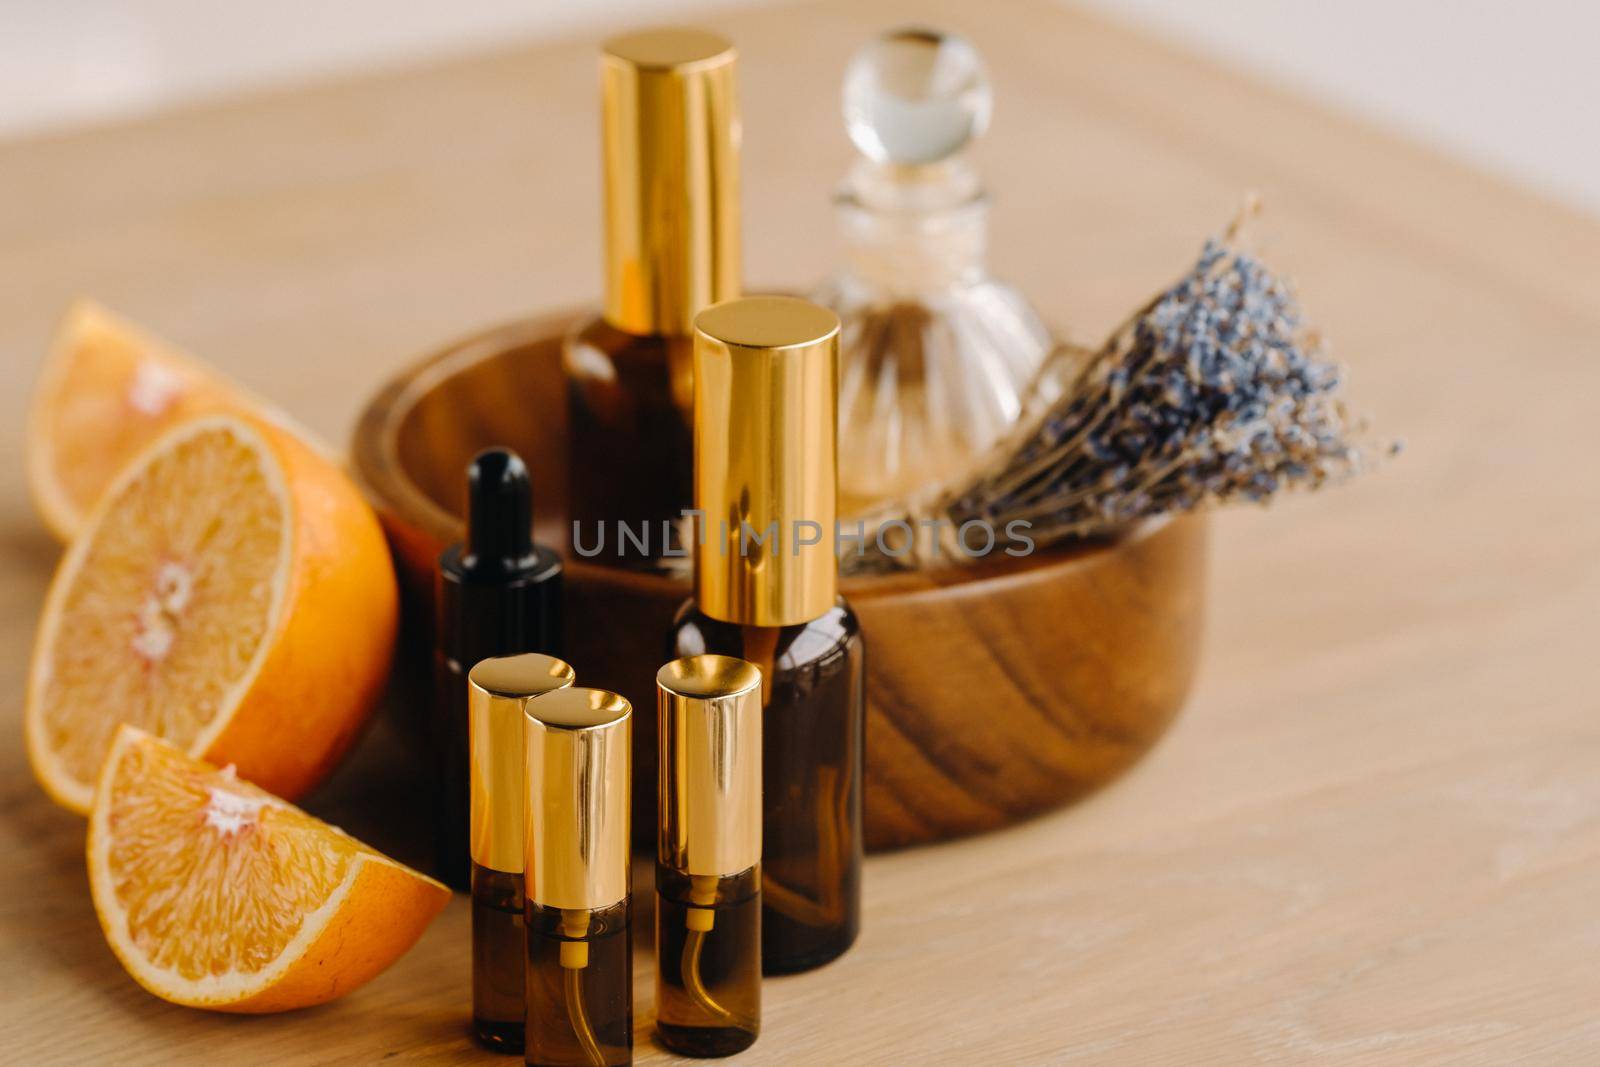 Essential oil in bottles with the aroma of orange and lavender lying on a wooden surface.